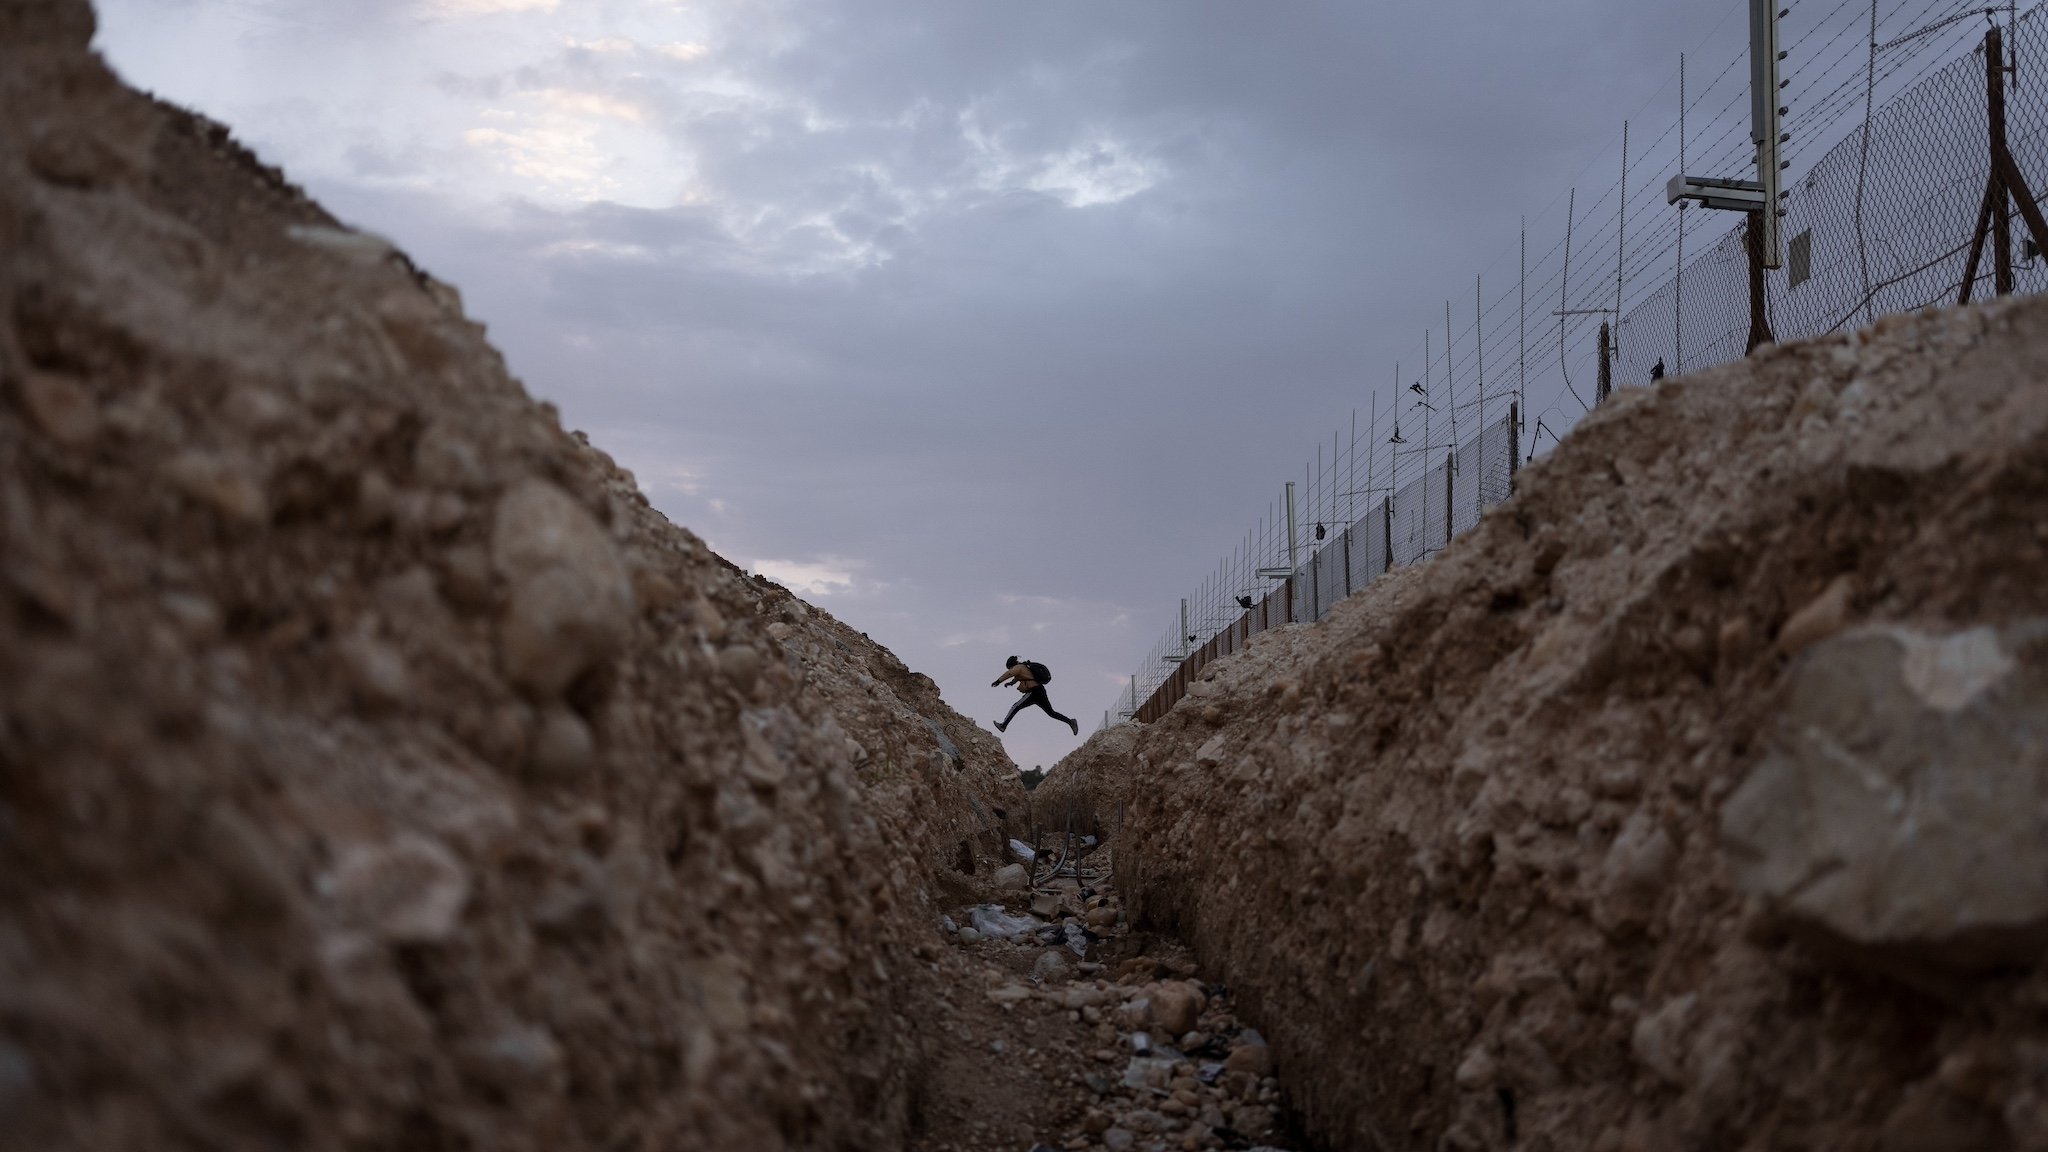 A Palestinian crosses into Israel from the West Bank through an opening in the Israeli separation barrier near Meitar crossing.